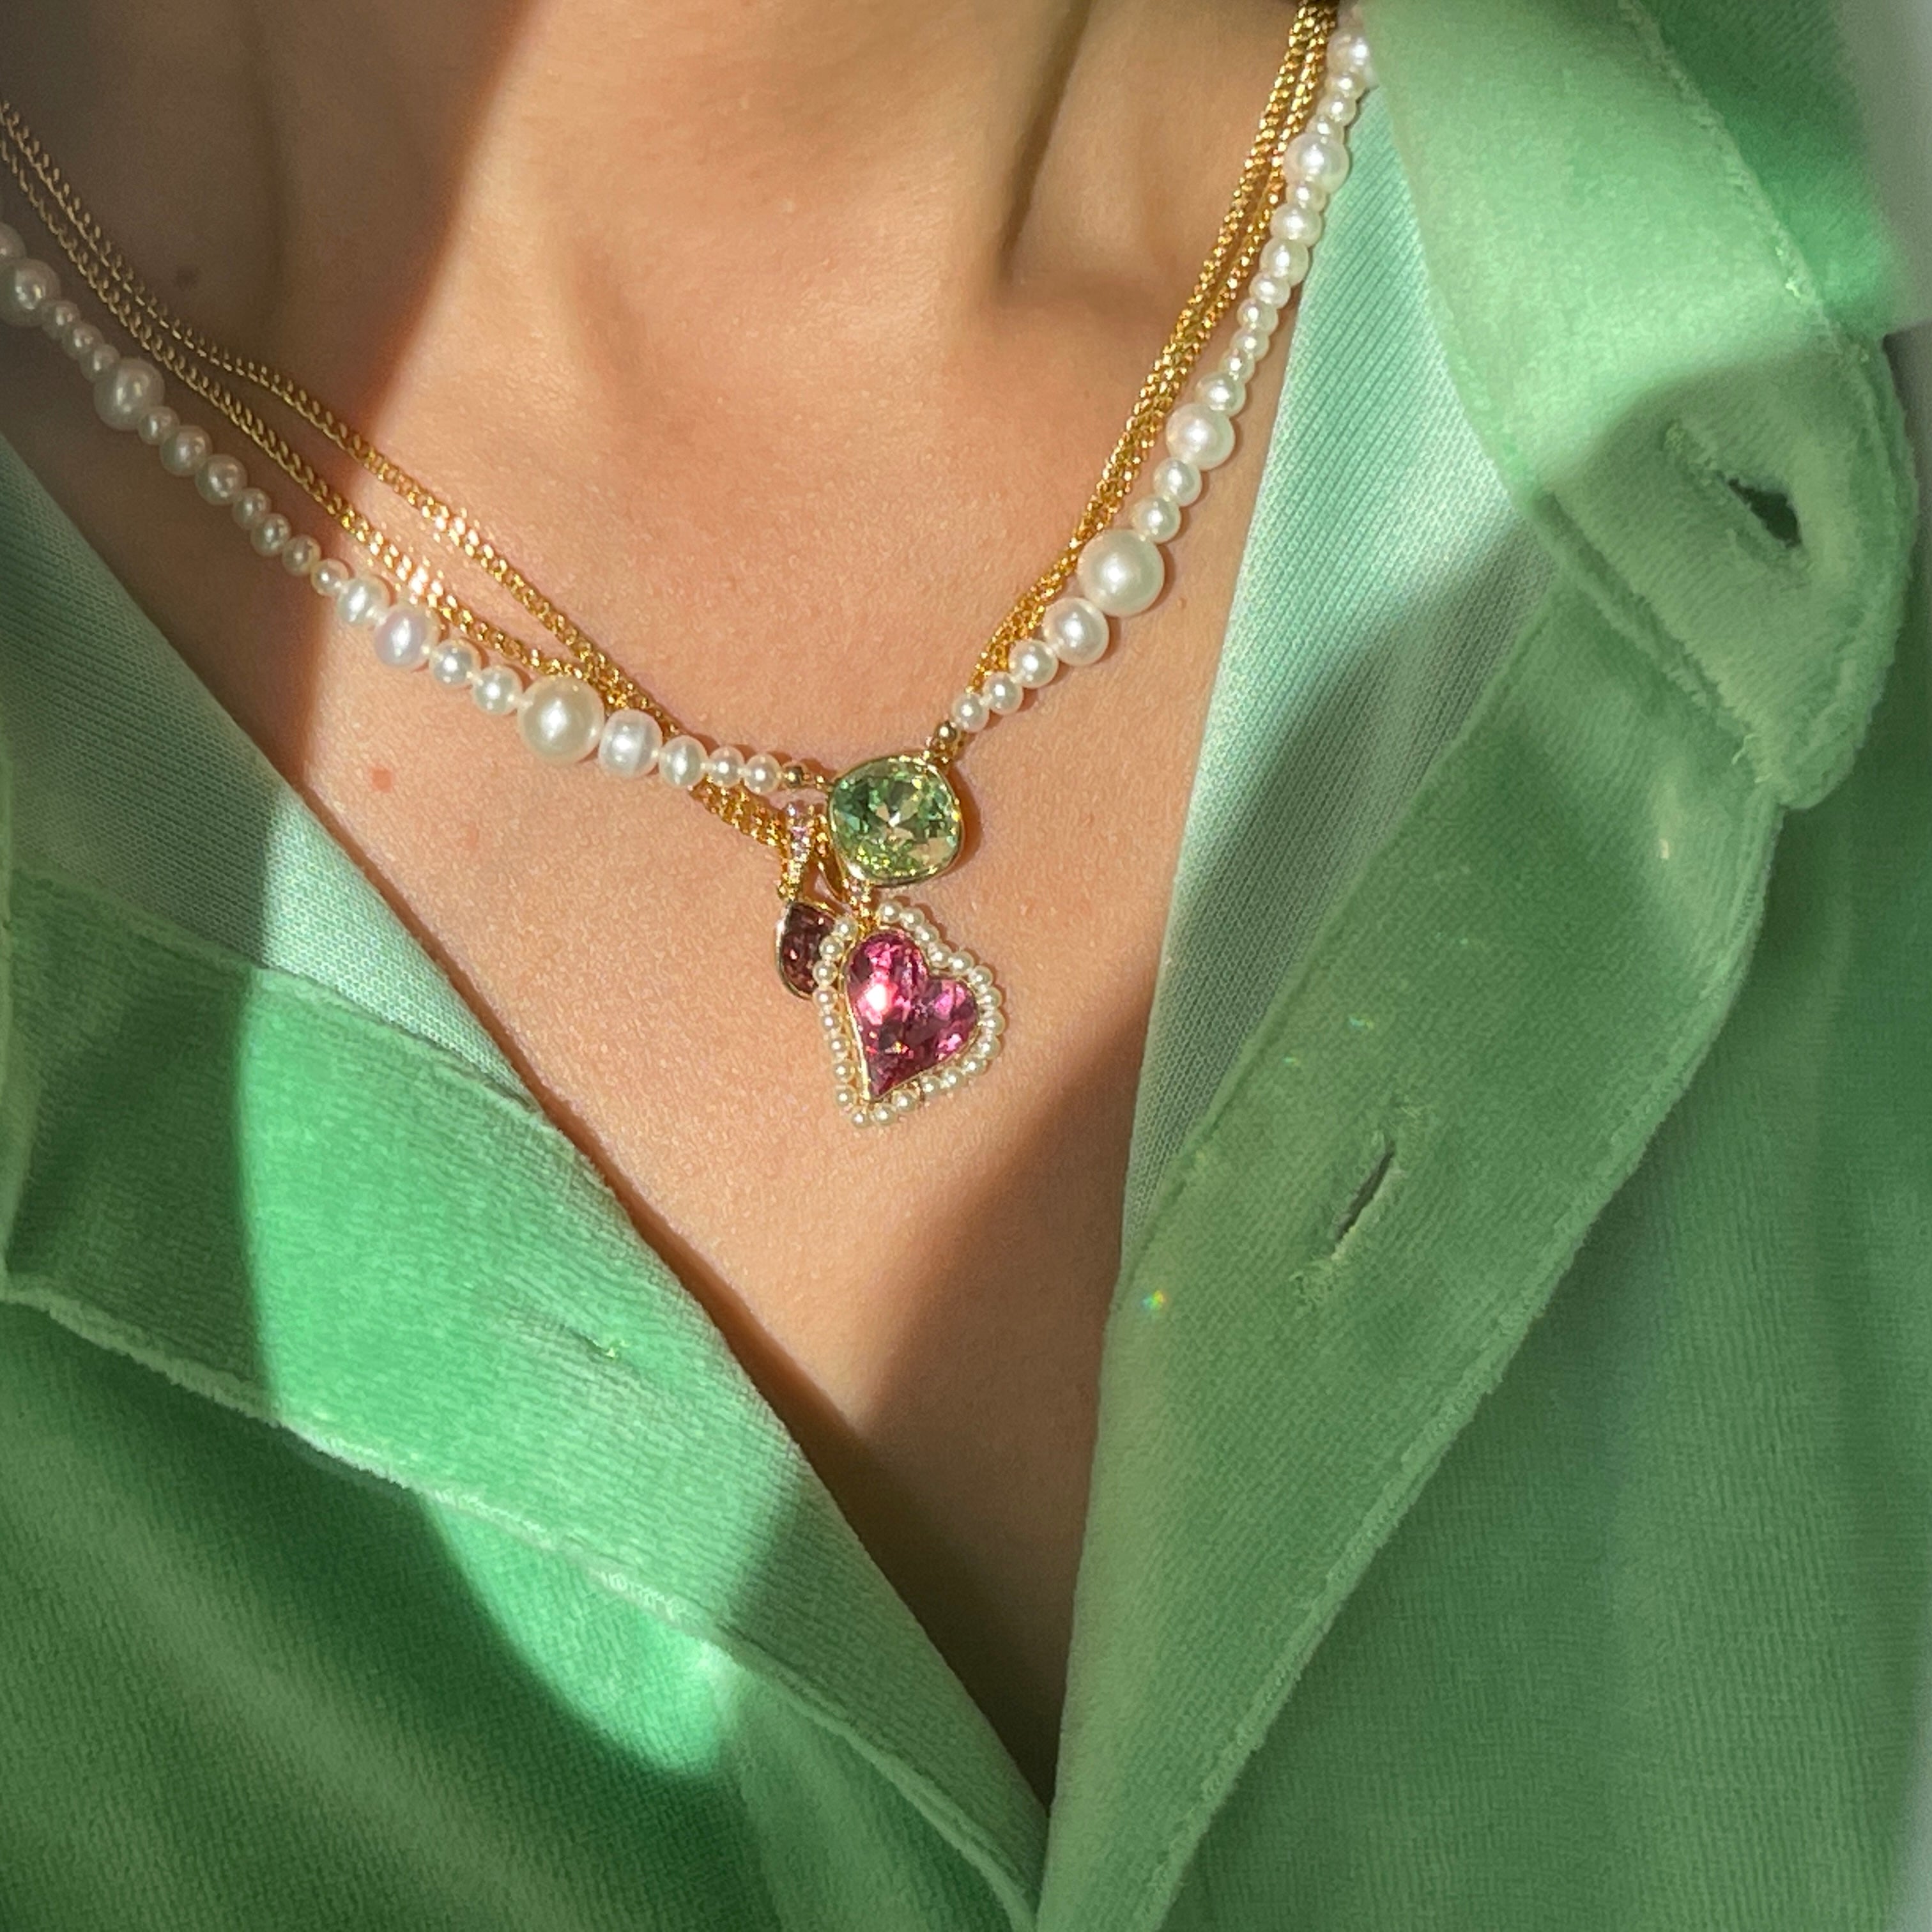 Influencer Program f Collection of Barbie's Jewelry- Girls' Heart-Dazzling Gemstones and Baroque Pearl Necklaces